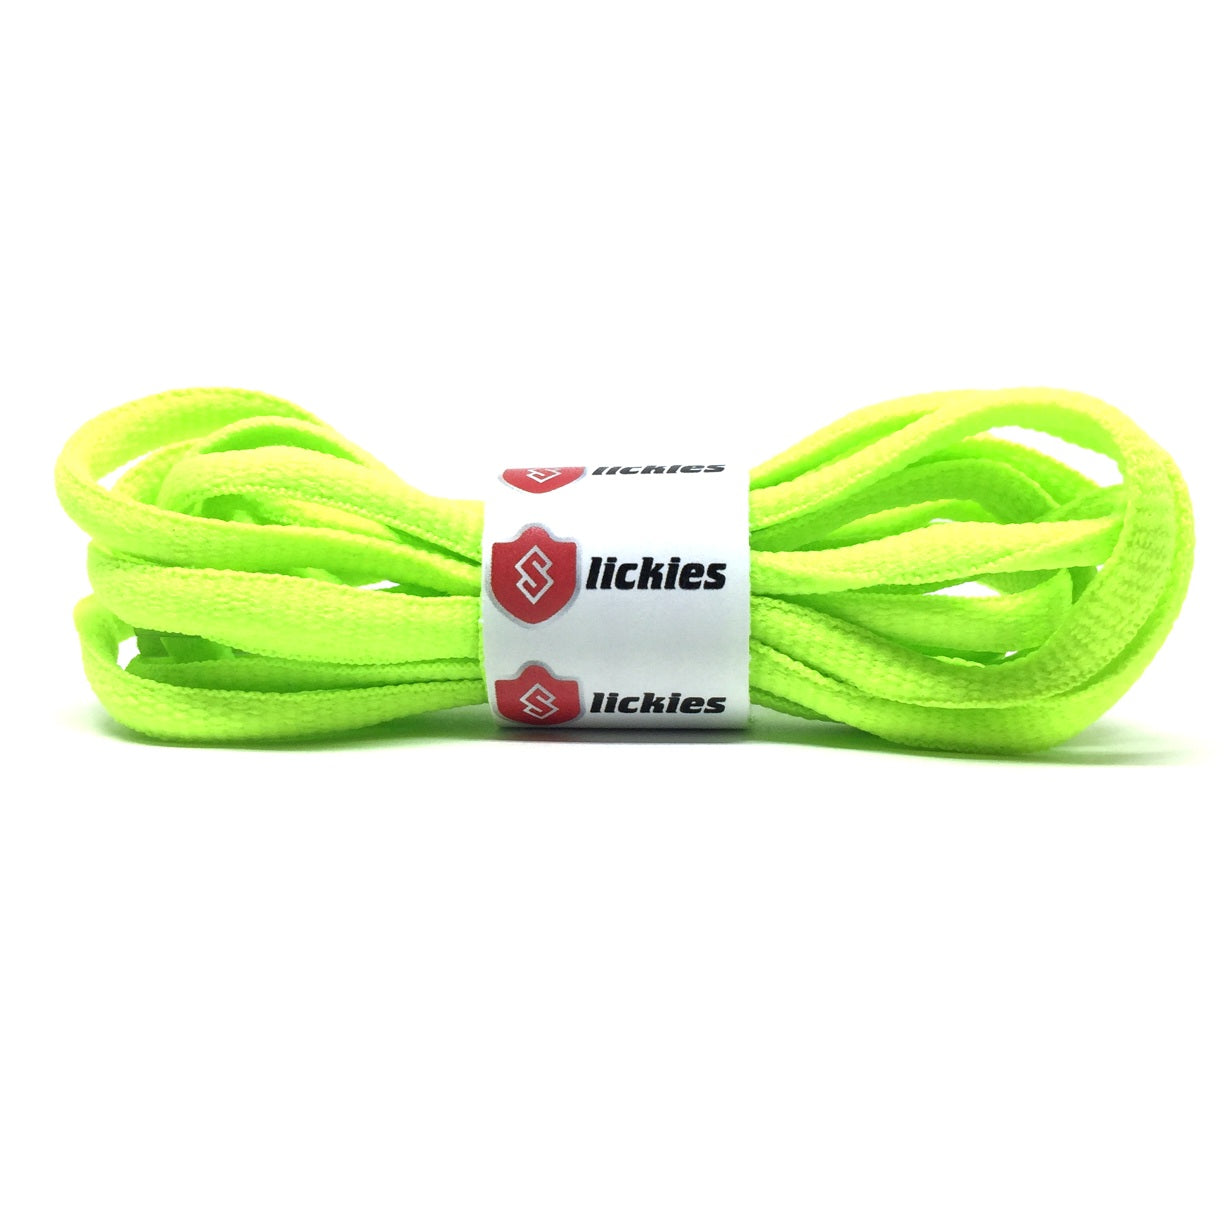 BASICS Oval Laces - Neon Green - Slickies